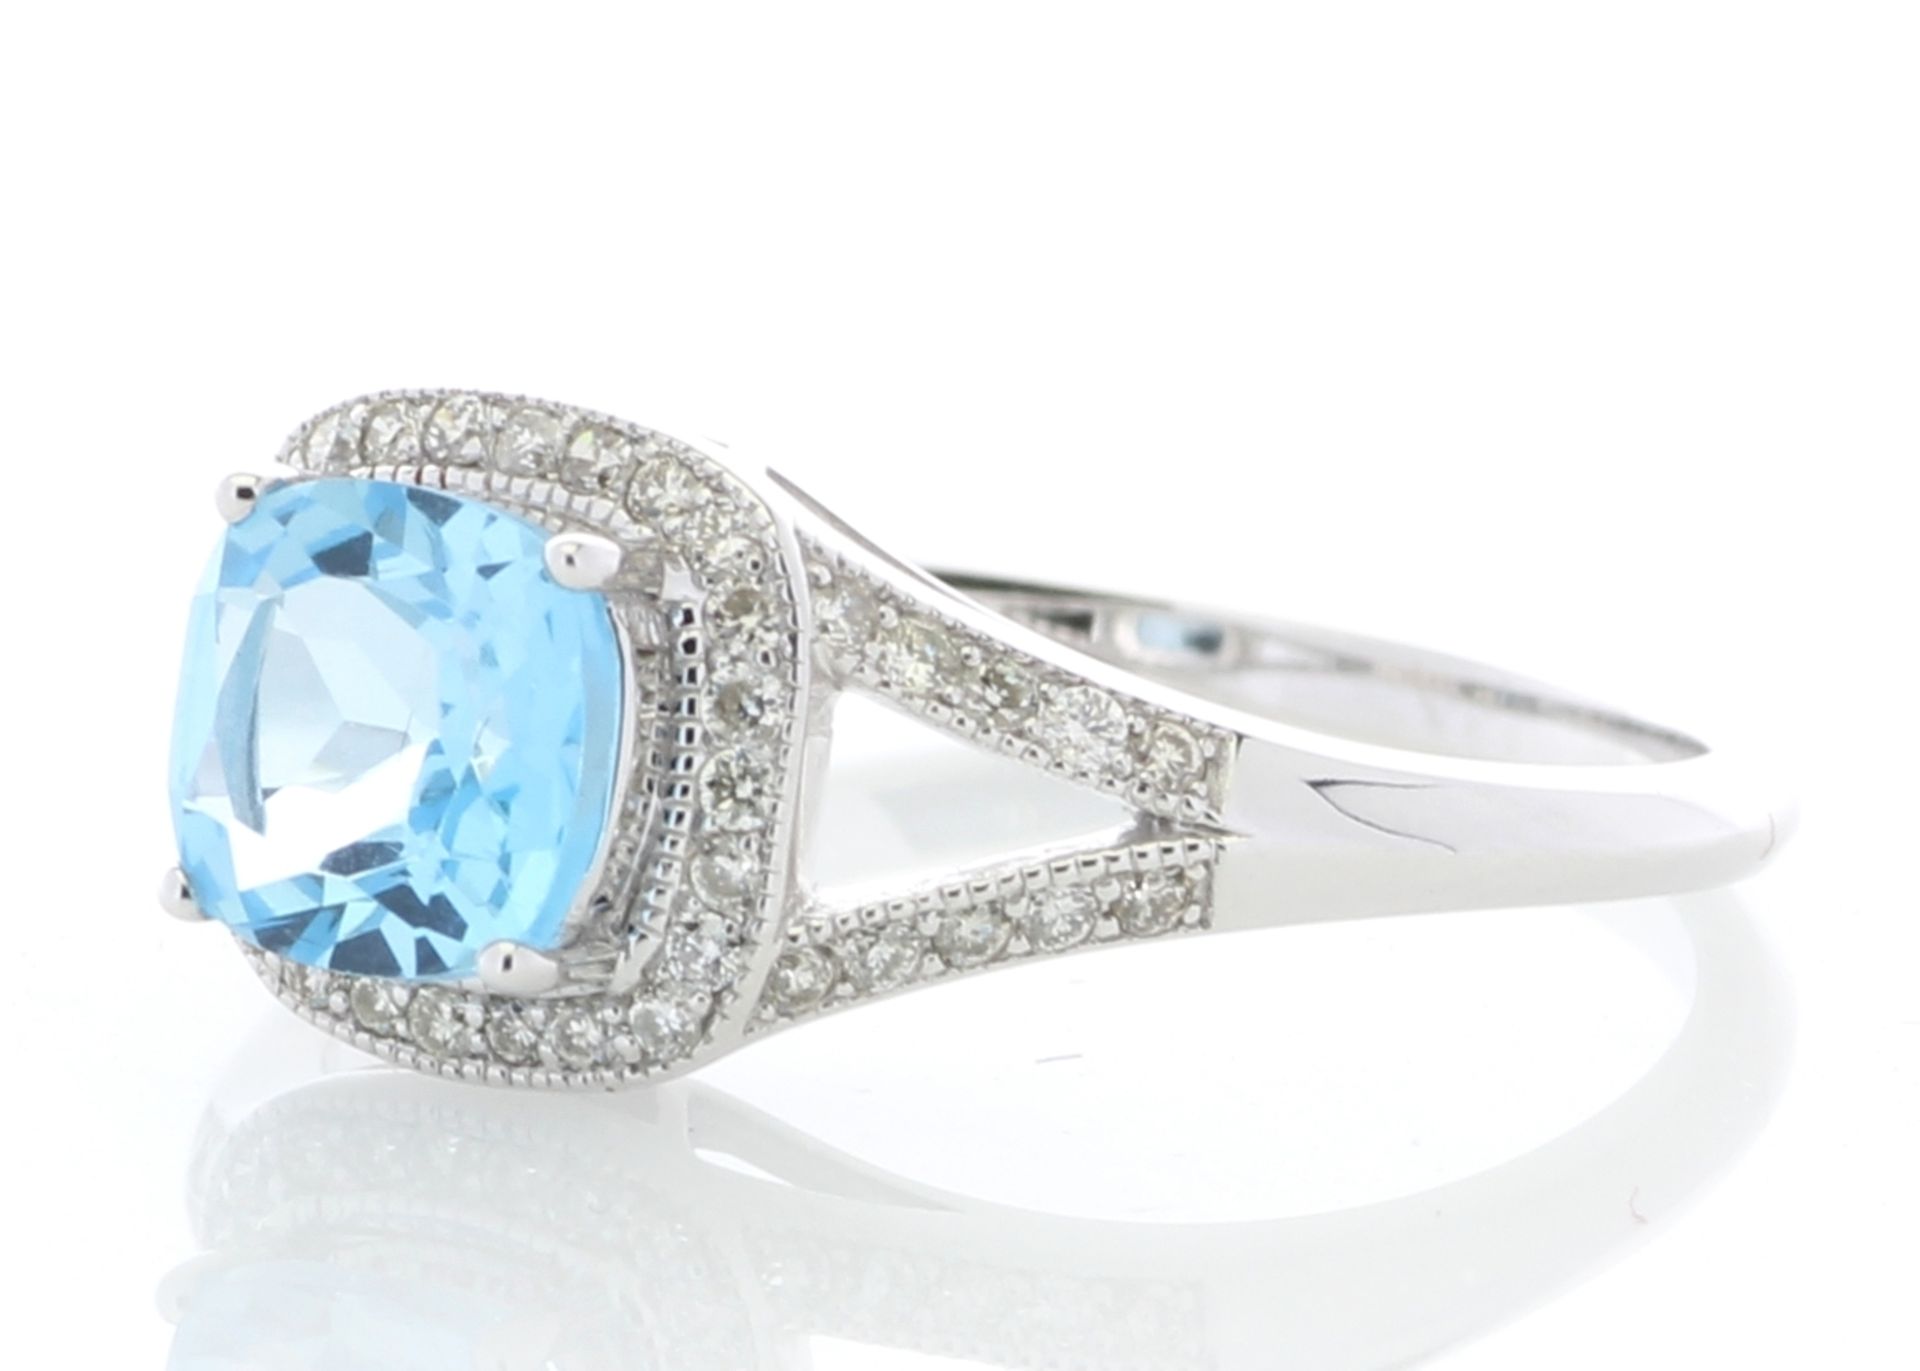 9ct White Gold Blue Topaz And Diamond Ring 0.22 Carats - Valued by GIE £2,695.00 - 9ct White Gold - Image 2 of 5